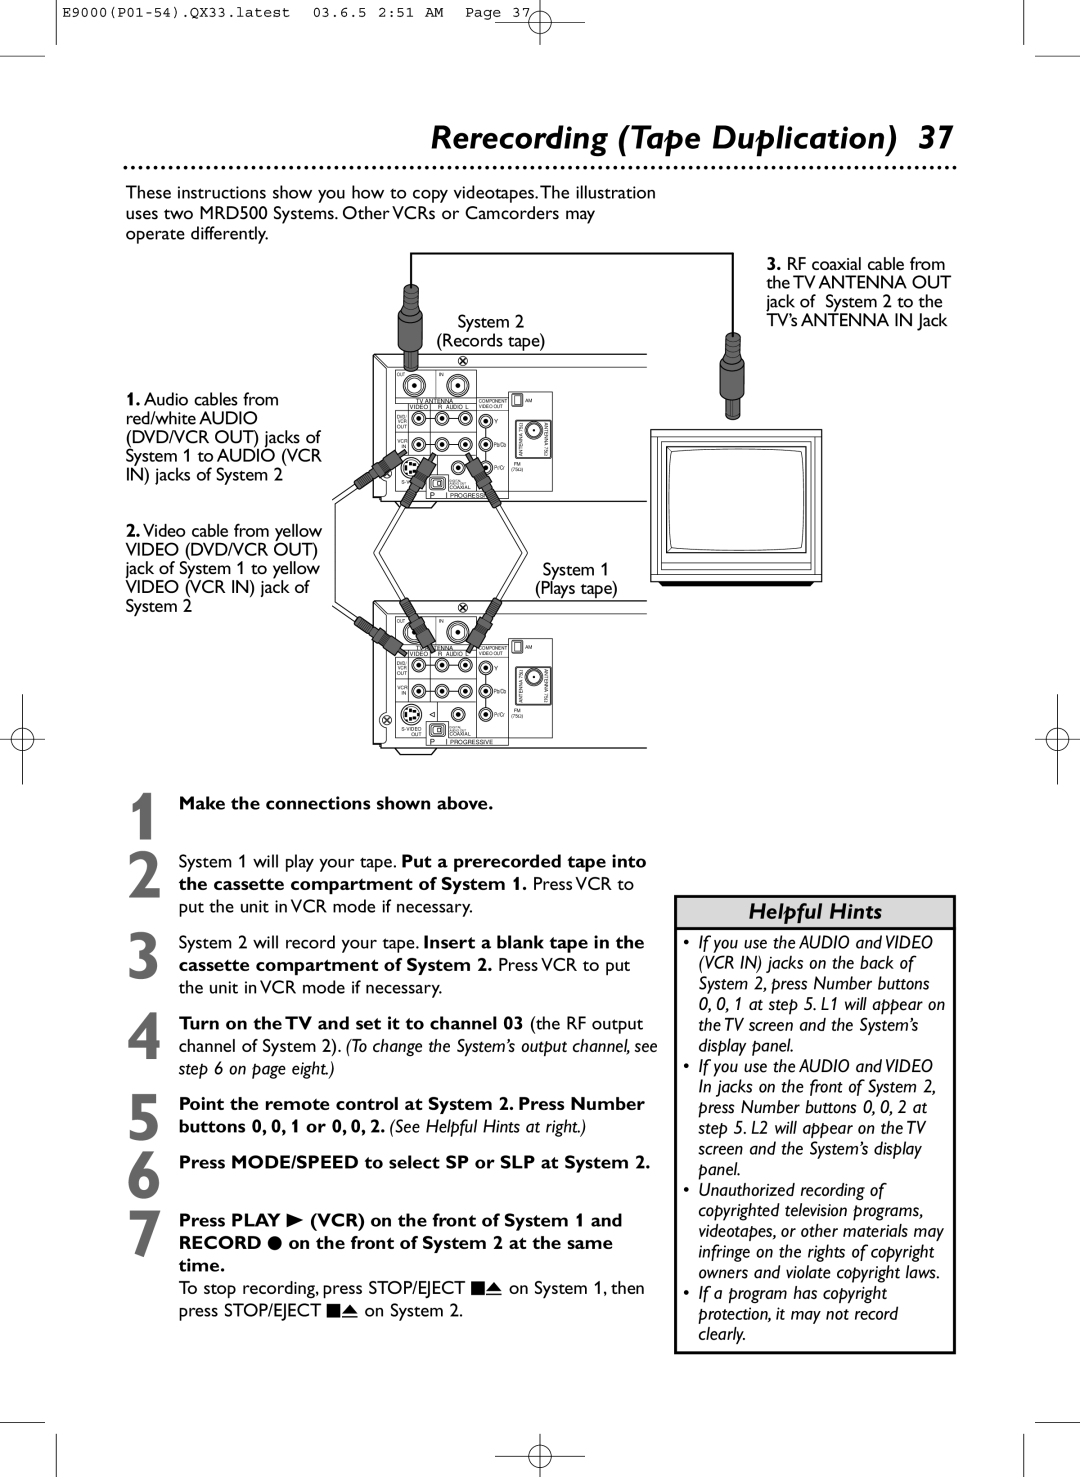 Magnavox MRD500VR owner manual Rerecording Tape Duplication, Helpful Hints, Make the connections shown above 